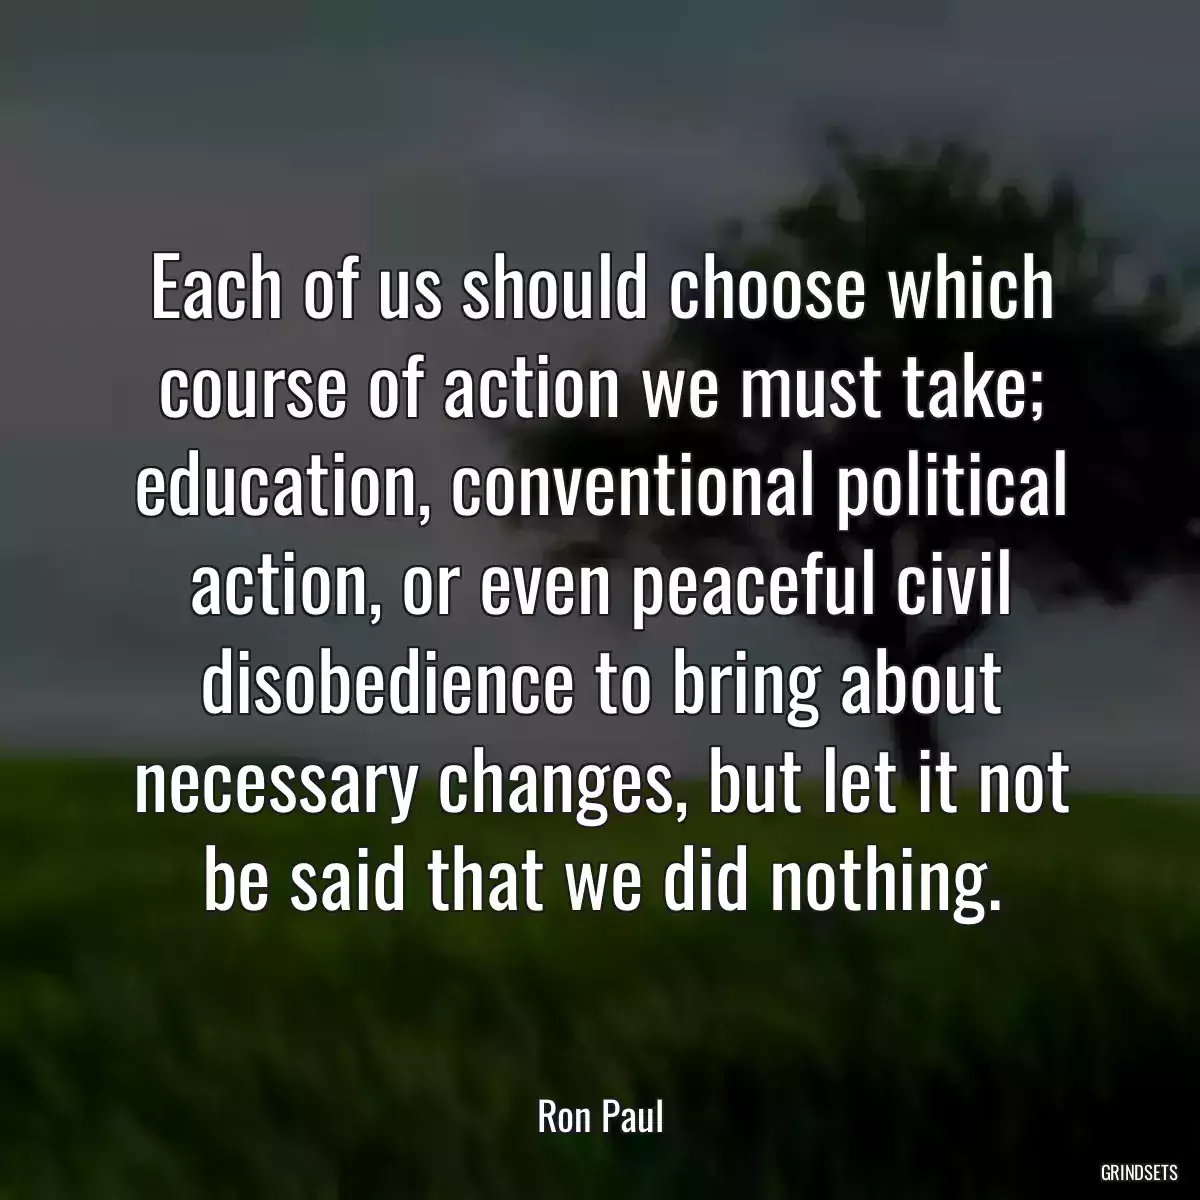 Each of us should choose which course of action we must take; education, conventional political action, or even peaceful civil disobedience to bring about necessary changes, but let it not be said that we did nothing.